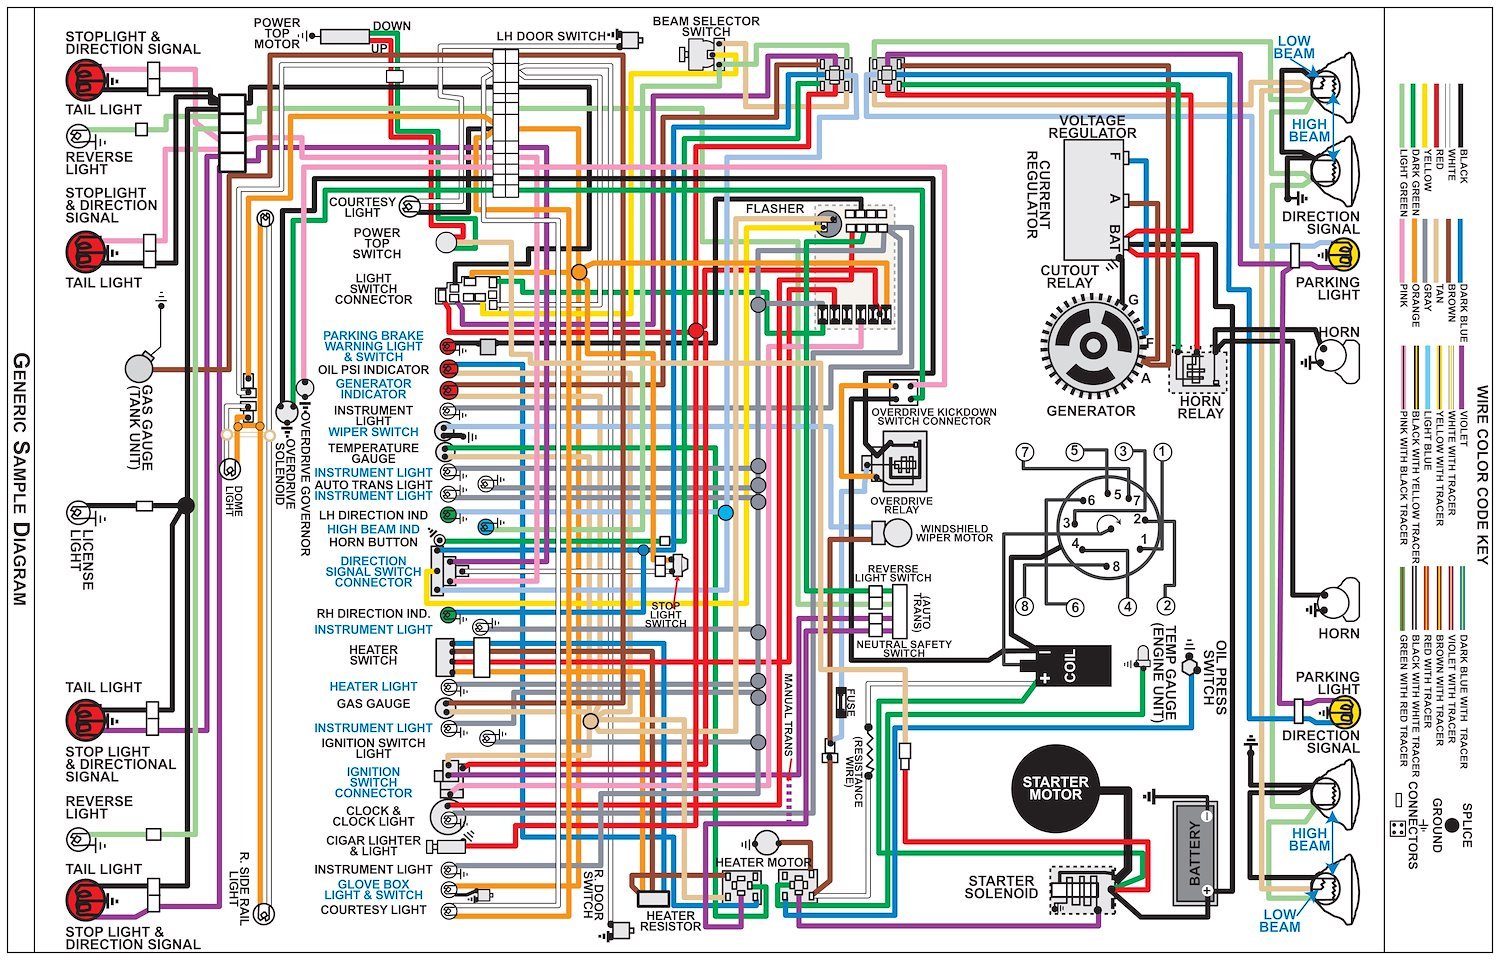 Wiring Diagram for 1964 Ford Galaxie, 11 in x 17 in., Laminated